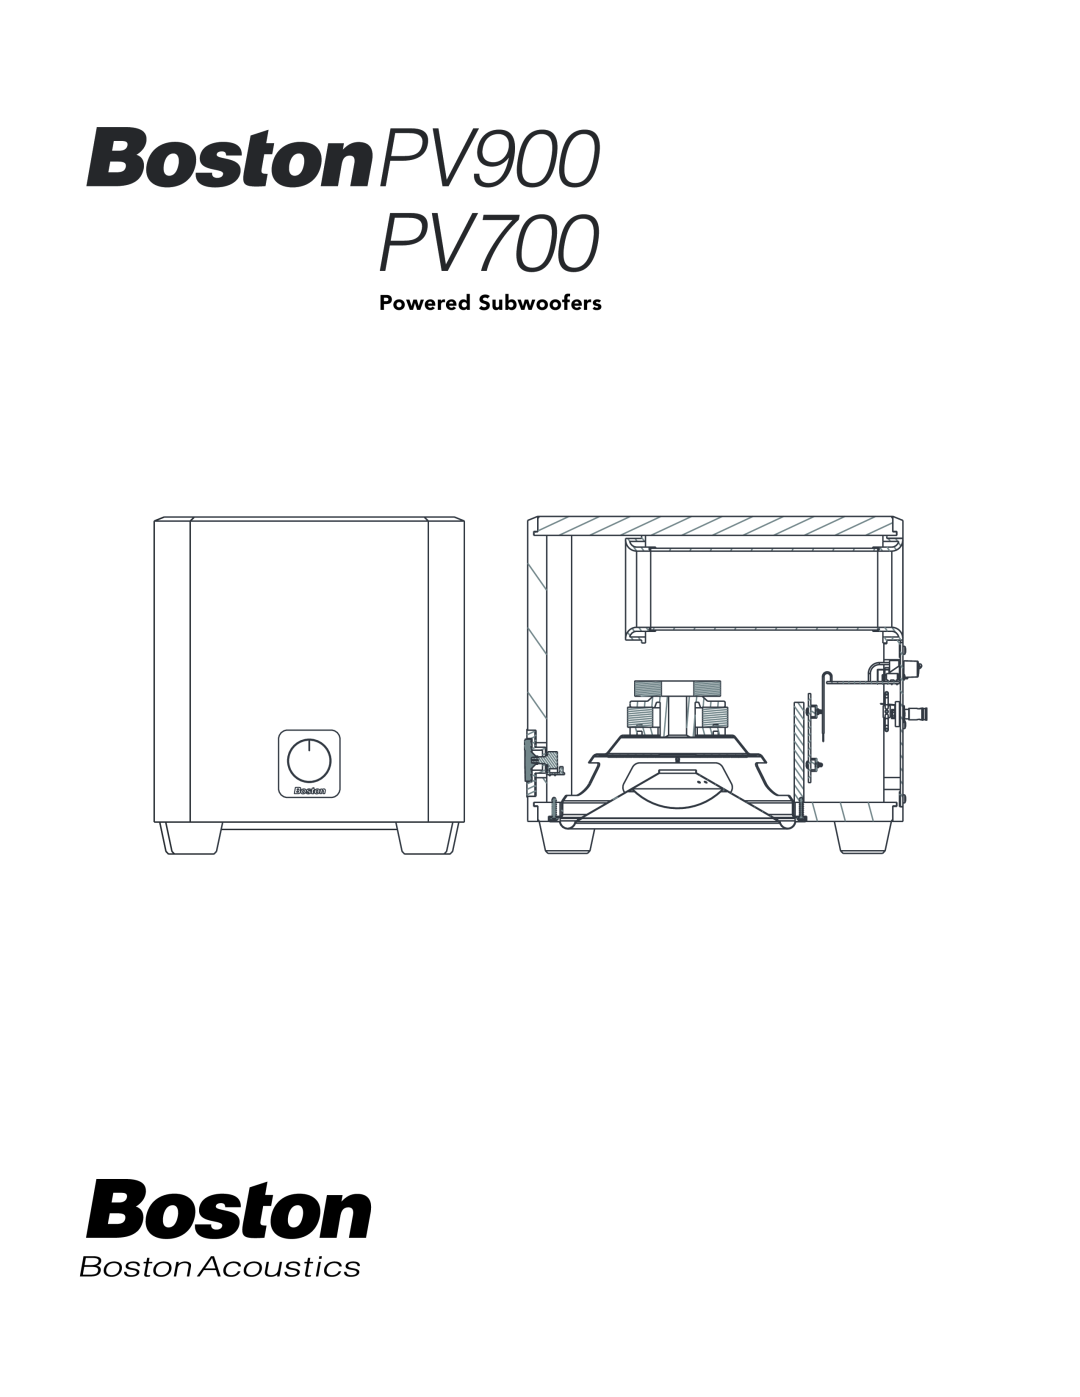 Boston Acoustics manual PV900 PV700, Powered Subwoofers 